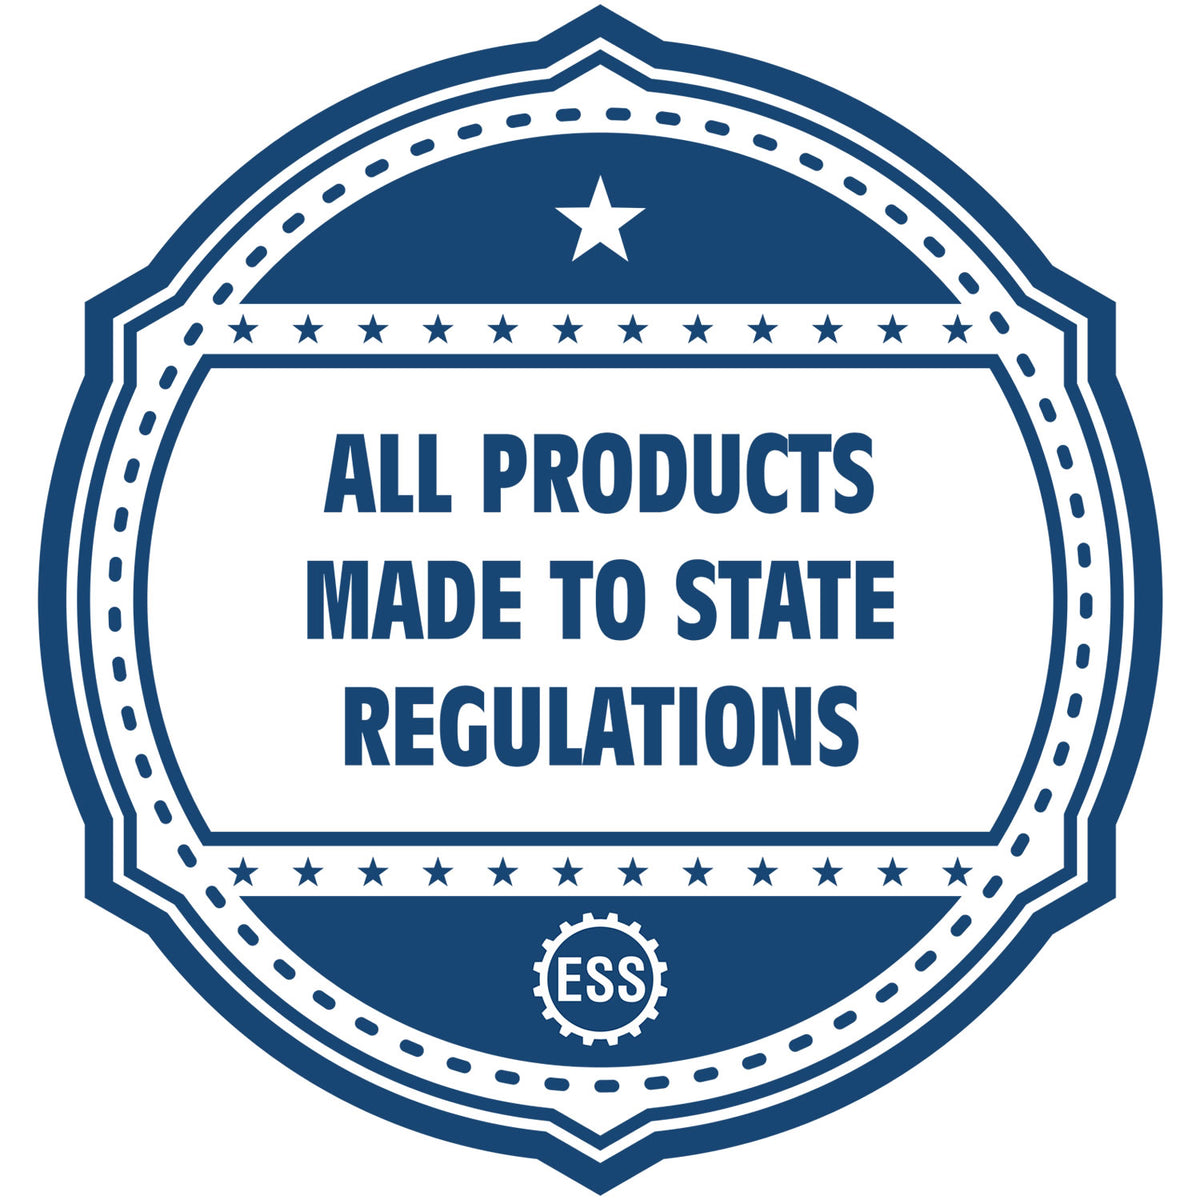 An icon or badge element for the Digital New Jersey Landscape Architect Stamp showing that this product is made in compliance with state regulations.